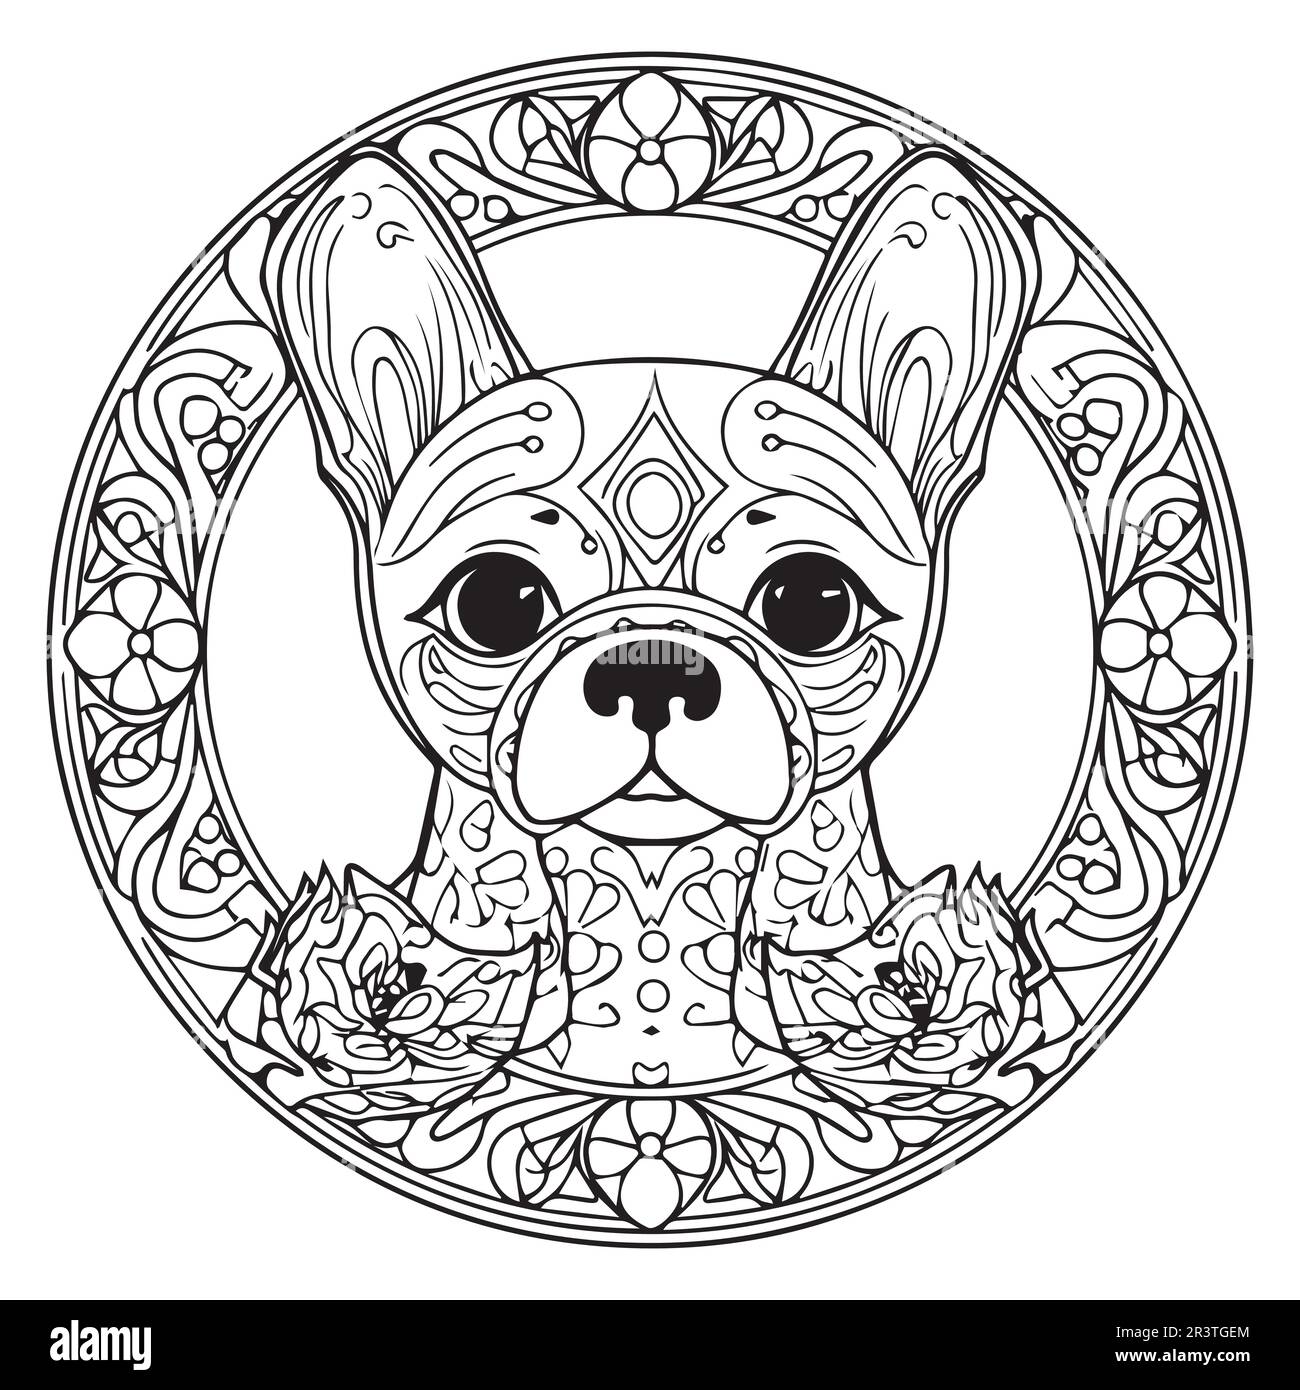 A dog with a flower pattern coloring page for adults. Stock Vector